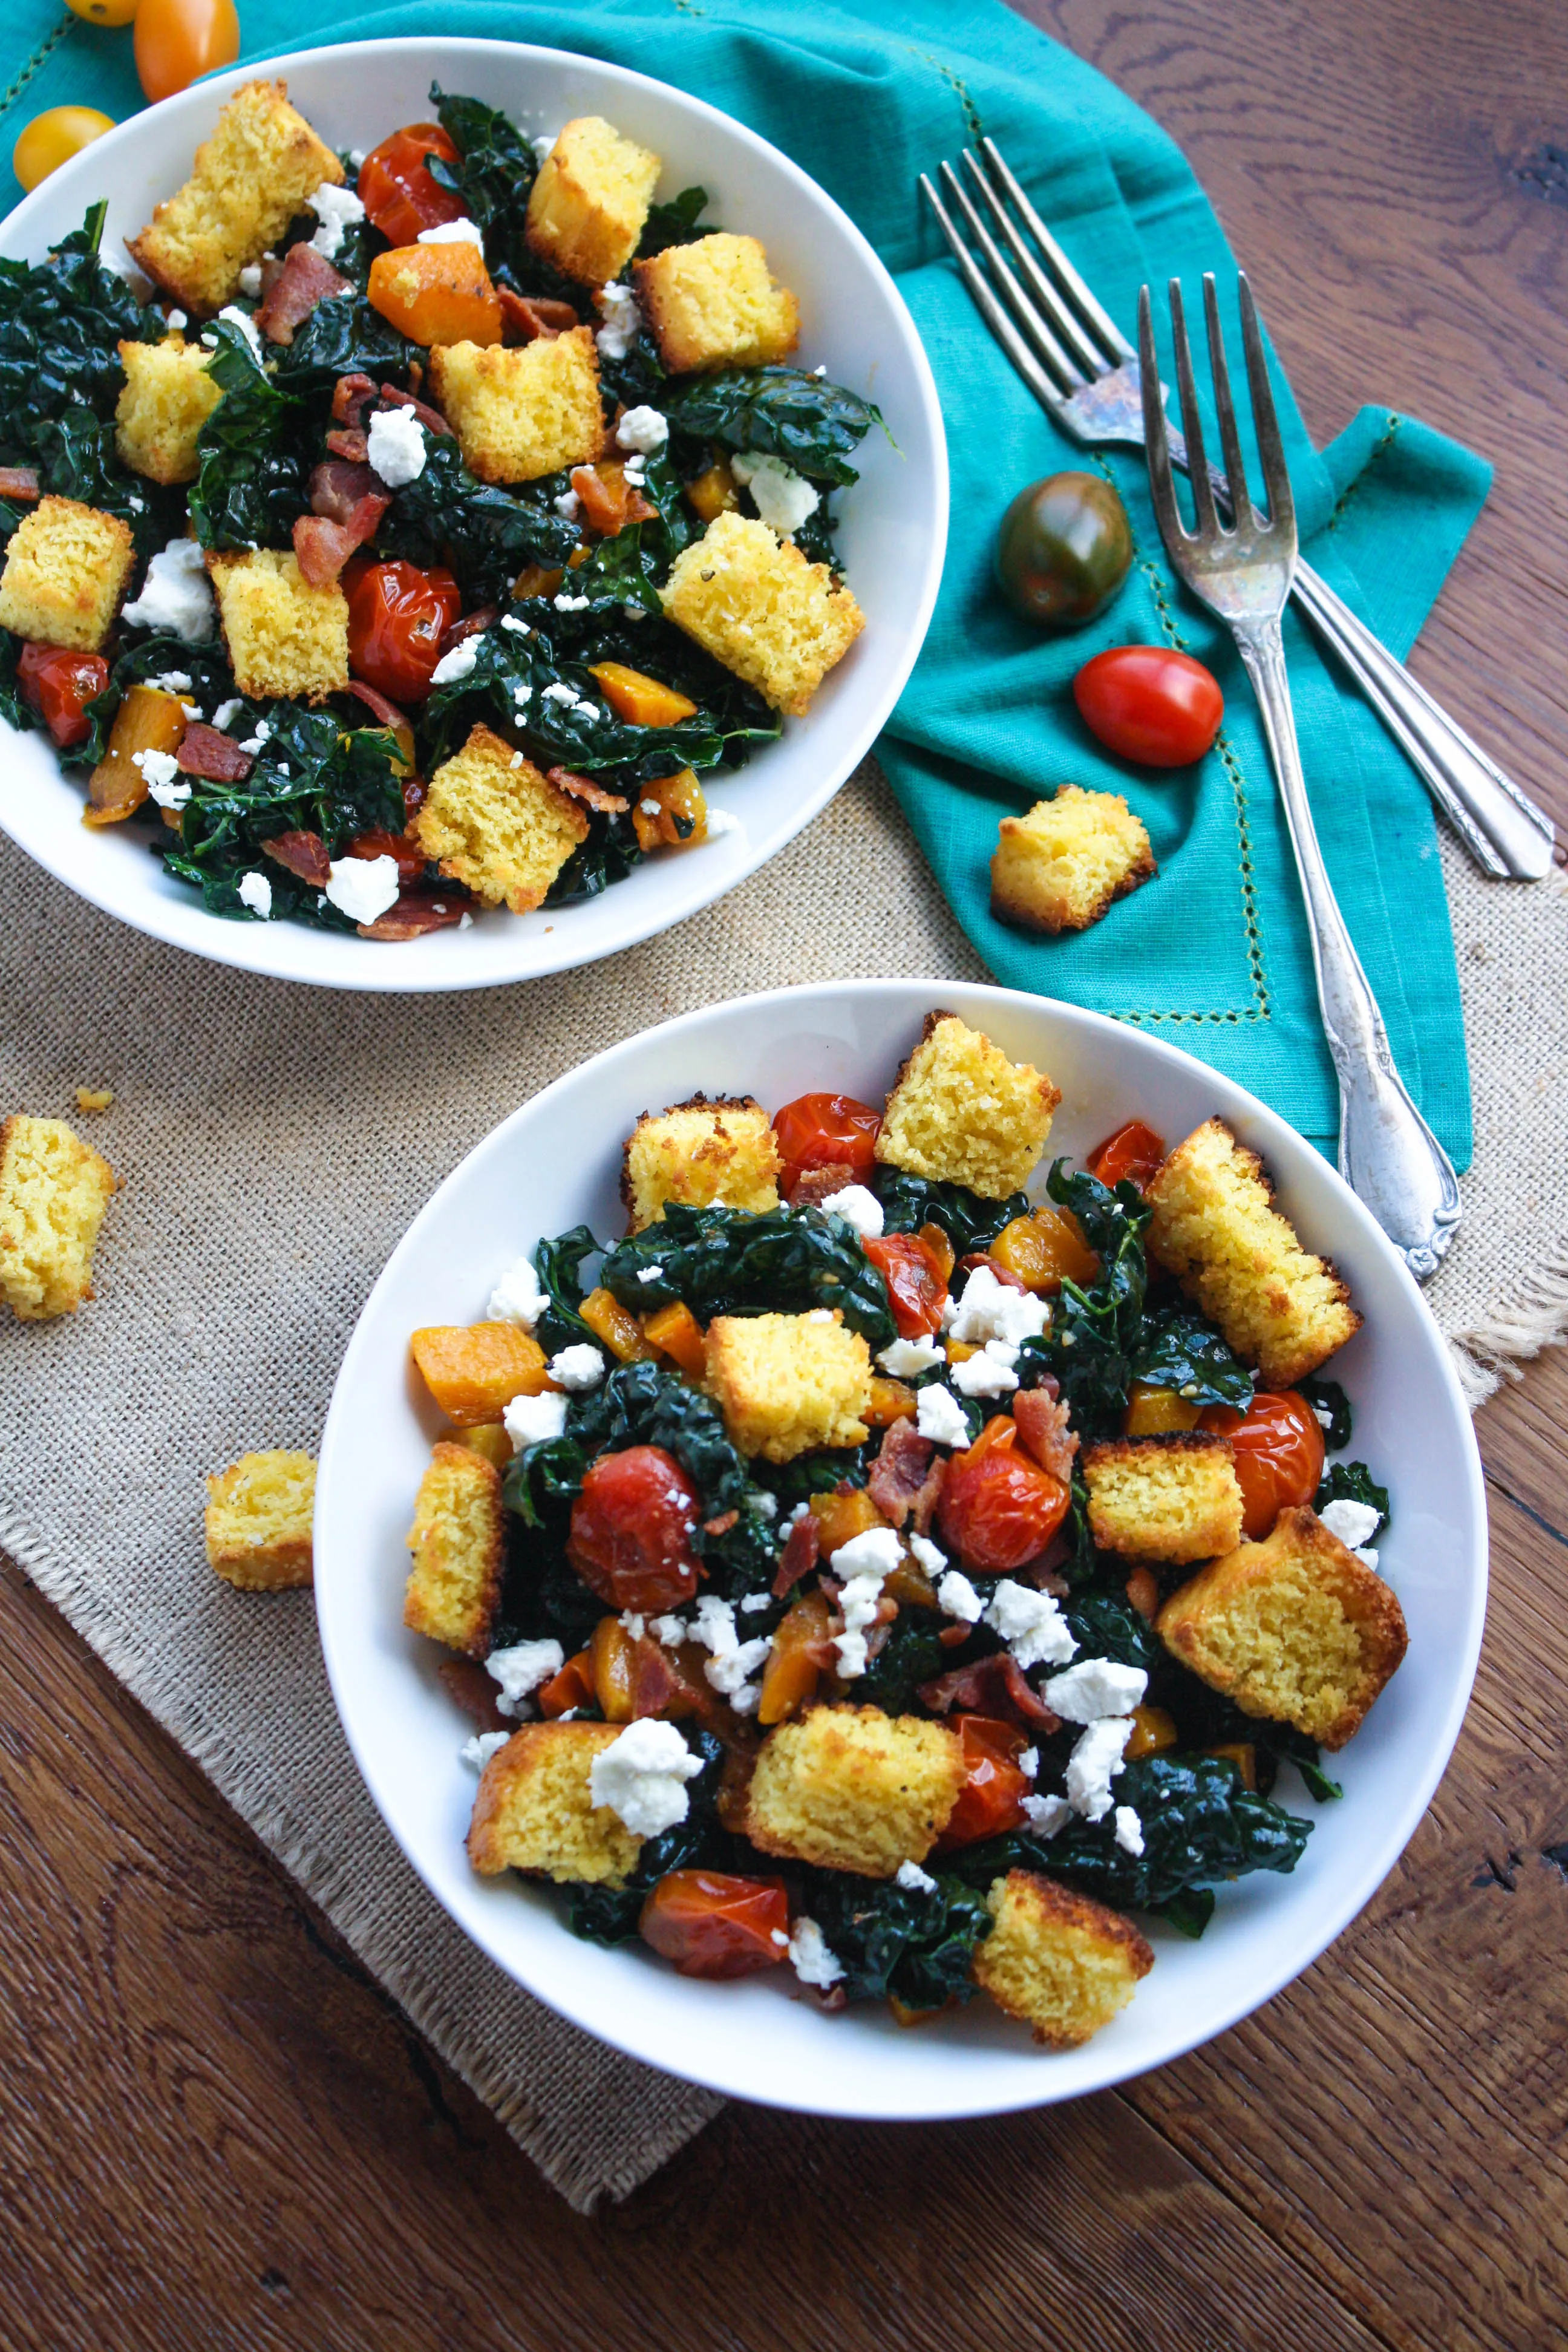 Kale and Cornbread Crouton Salad is a great day-after Thanksgiving dish. You'll love the cornbread croutons in this kale salad!